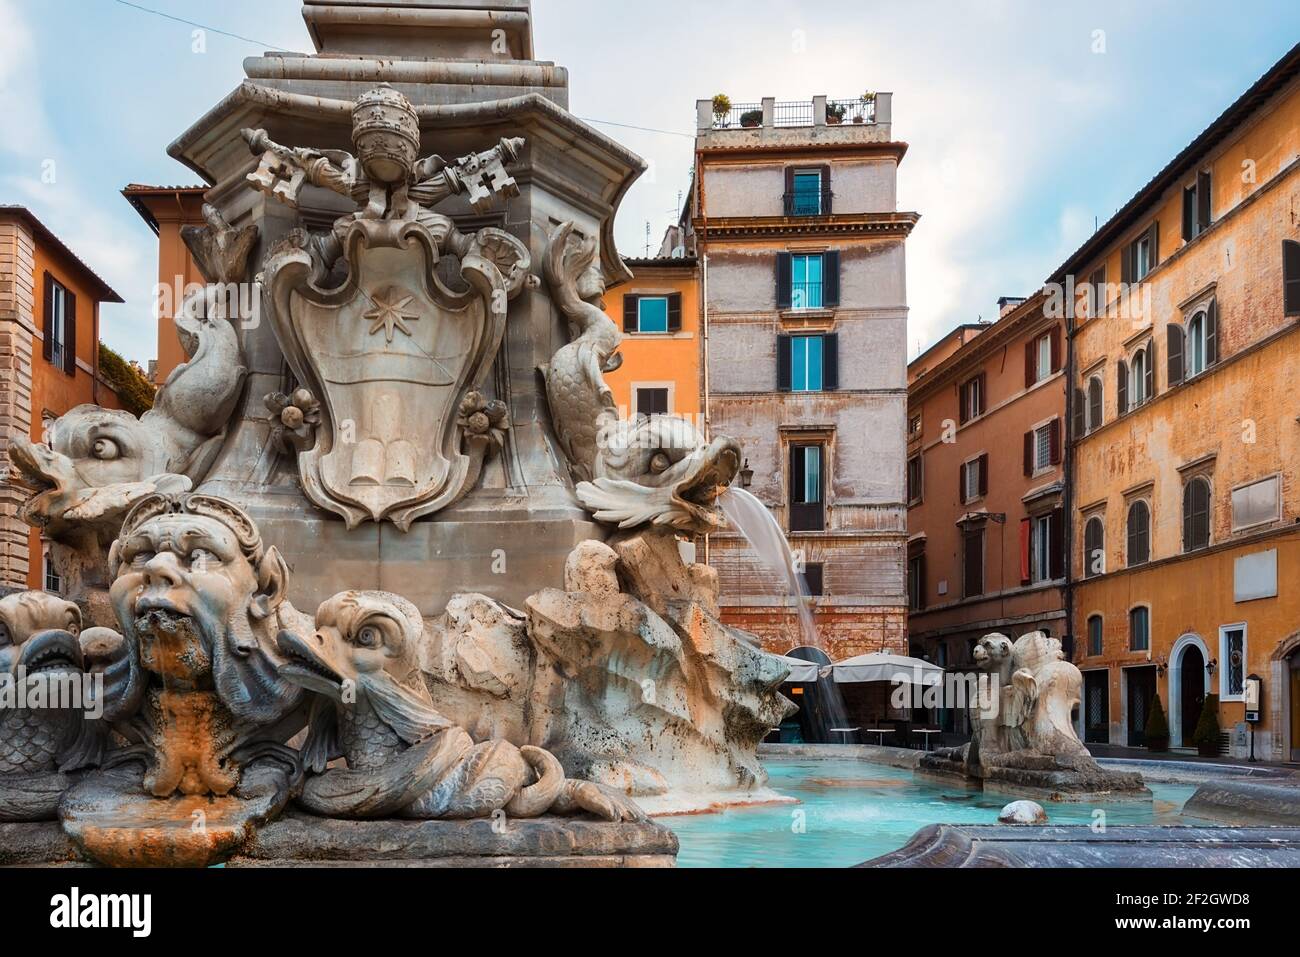 Fountain of the Four Rivers with an Egyptian obelisk. Italy. Rome. Navon Square. Stock Photo